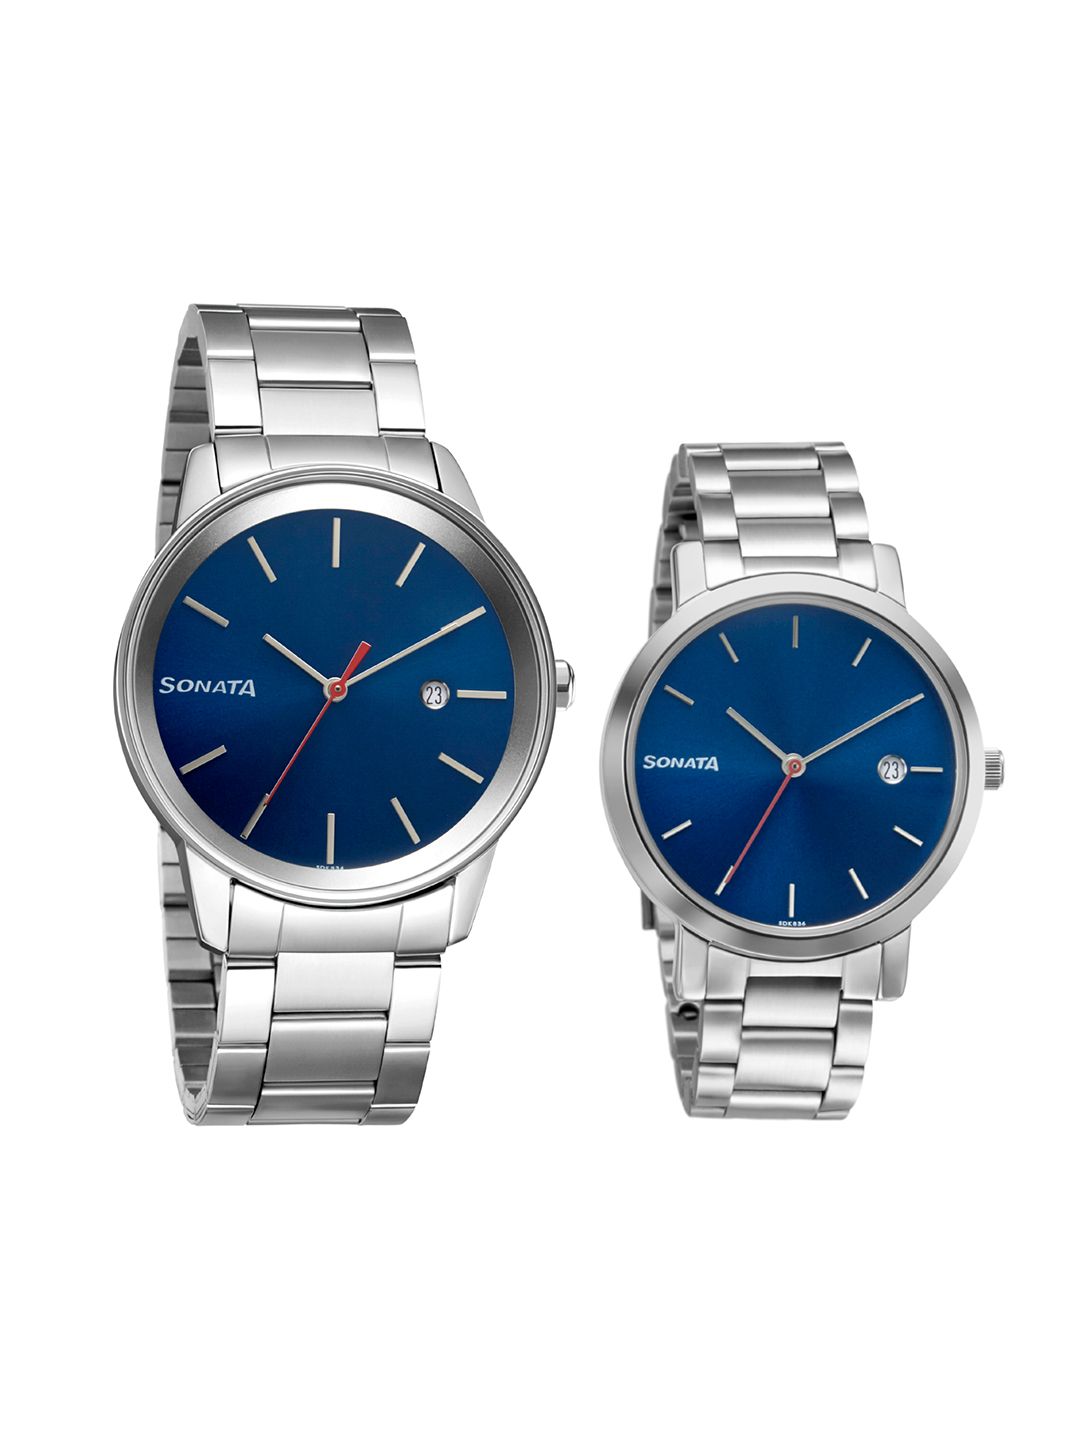 Sonata Unisex Set of 2 Blue Analogue Watch 71338164SM01 Price in India